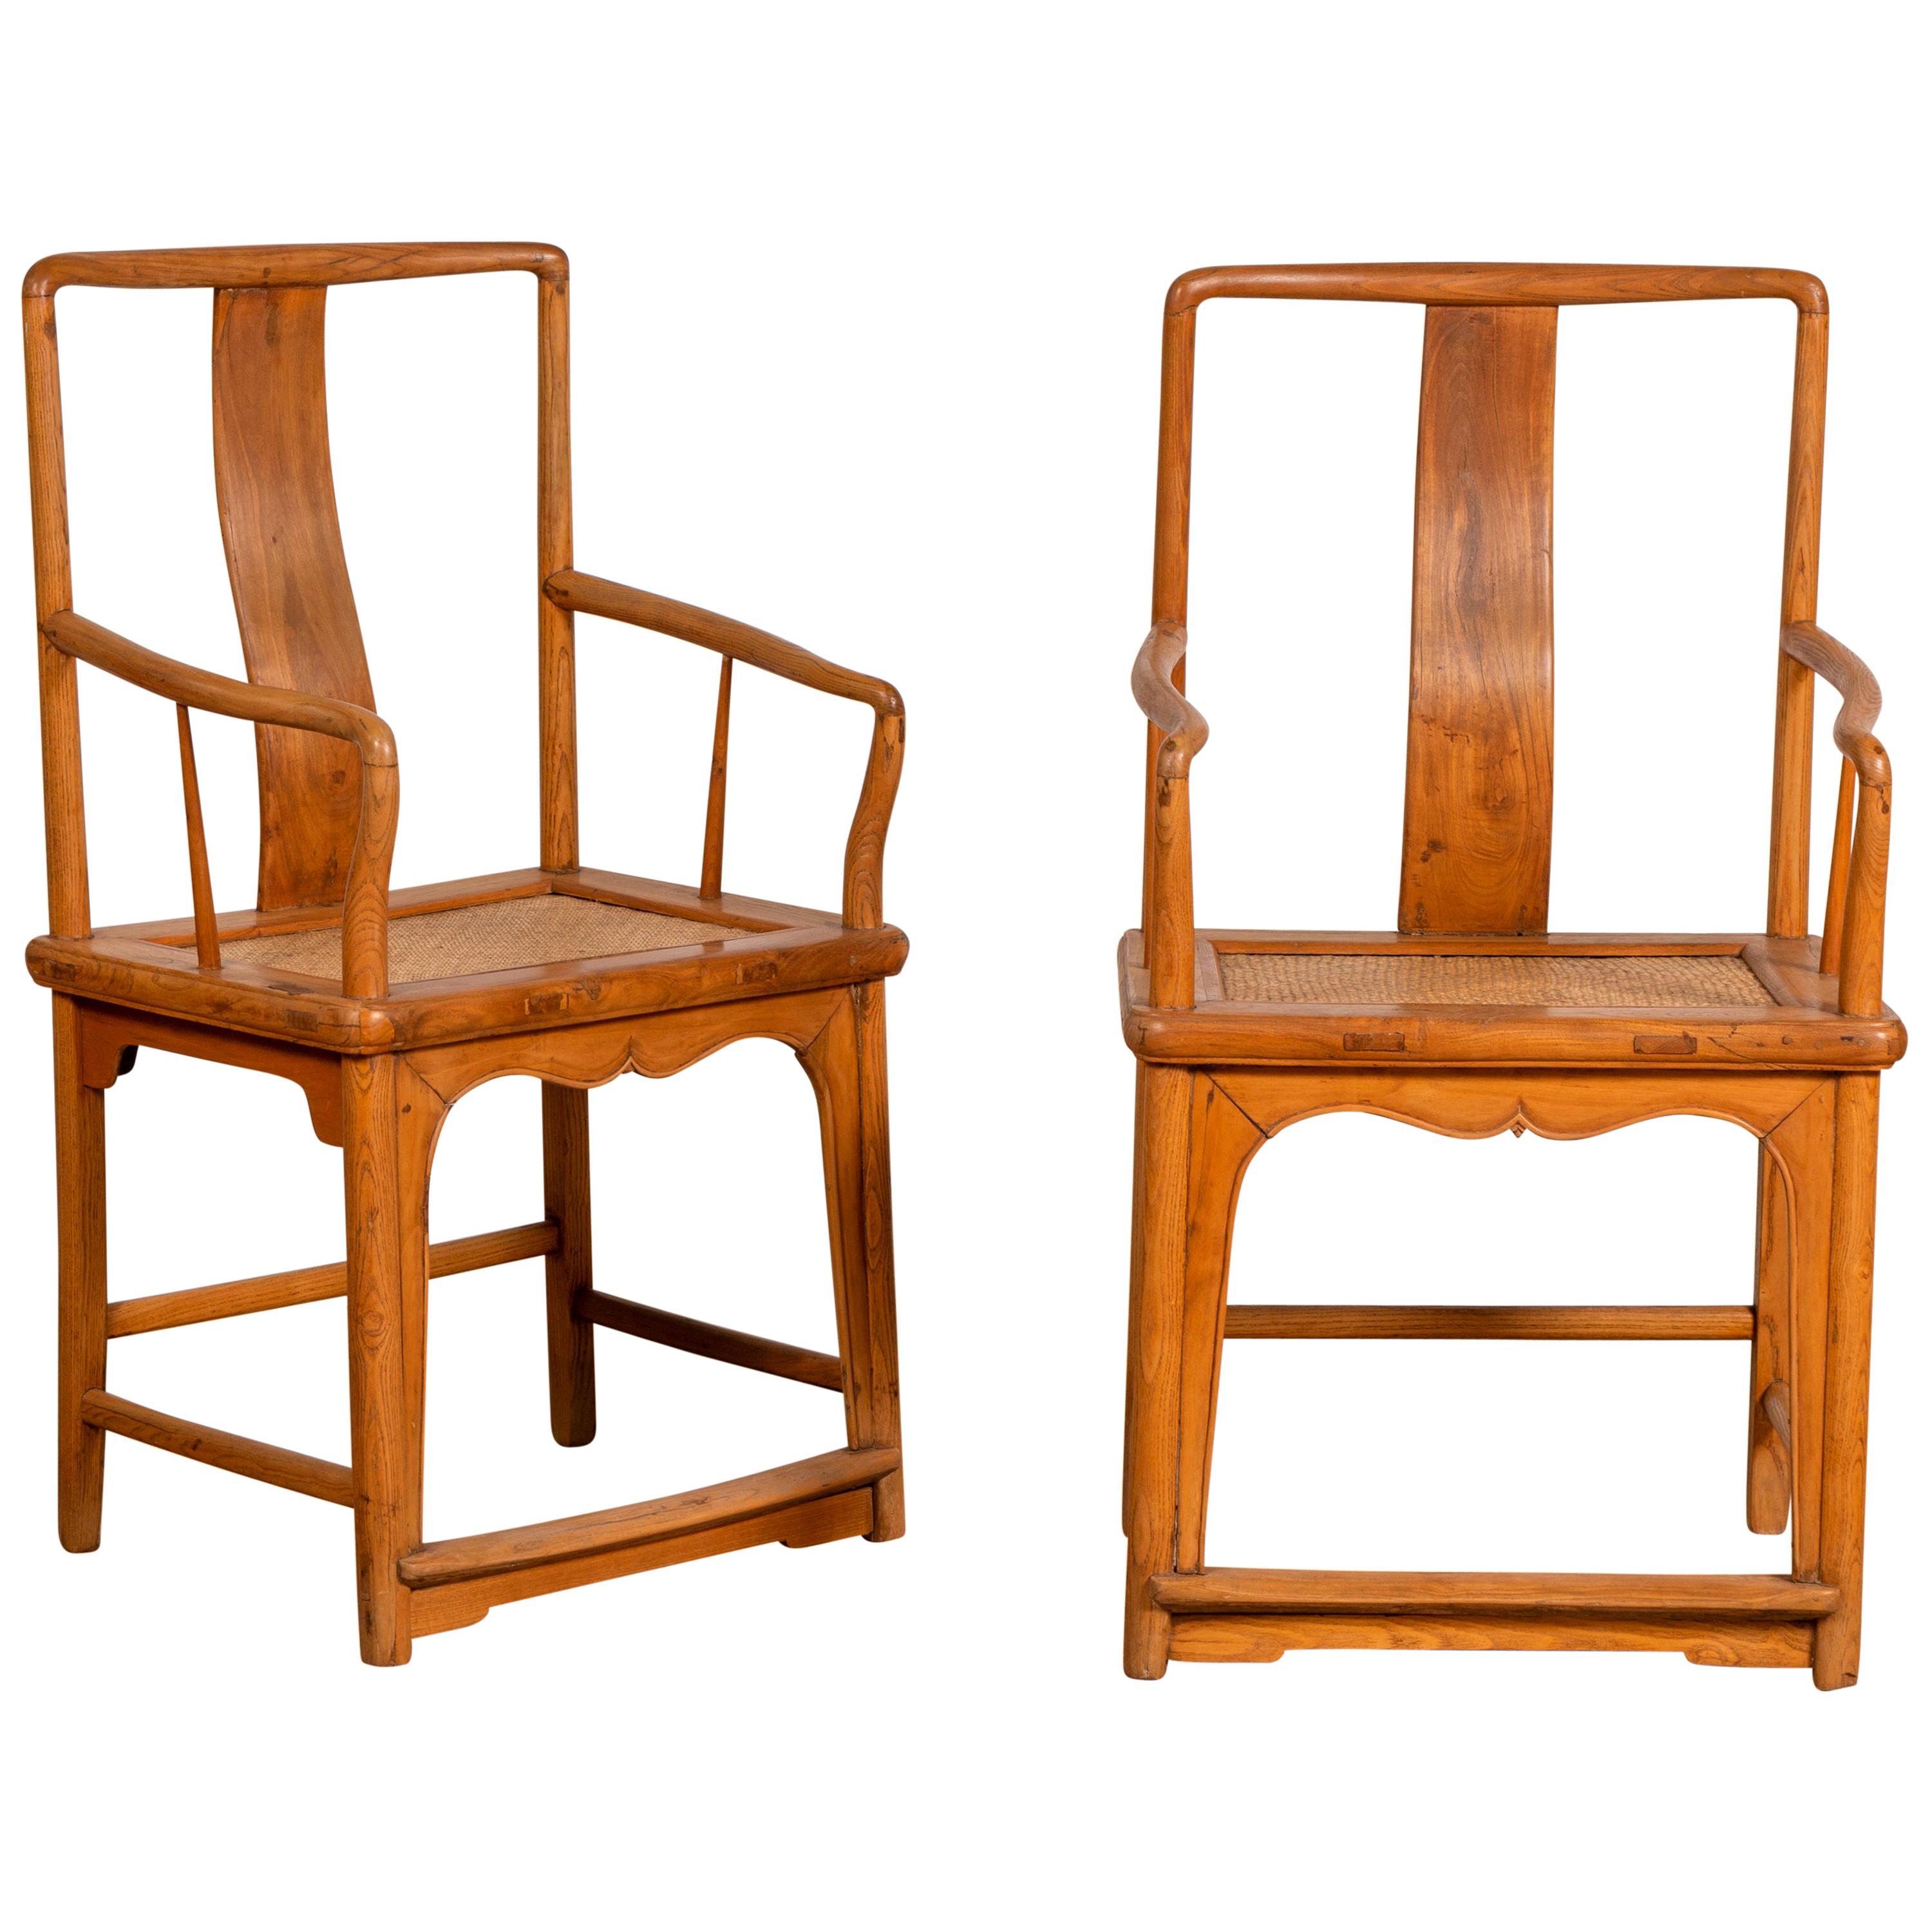 Ming Dynasty Style Wedding Armchairs with Curving Arms and Woven Rattan Seats